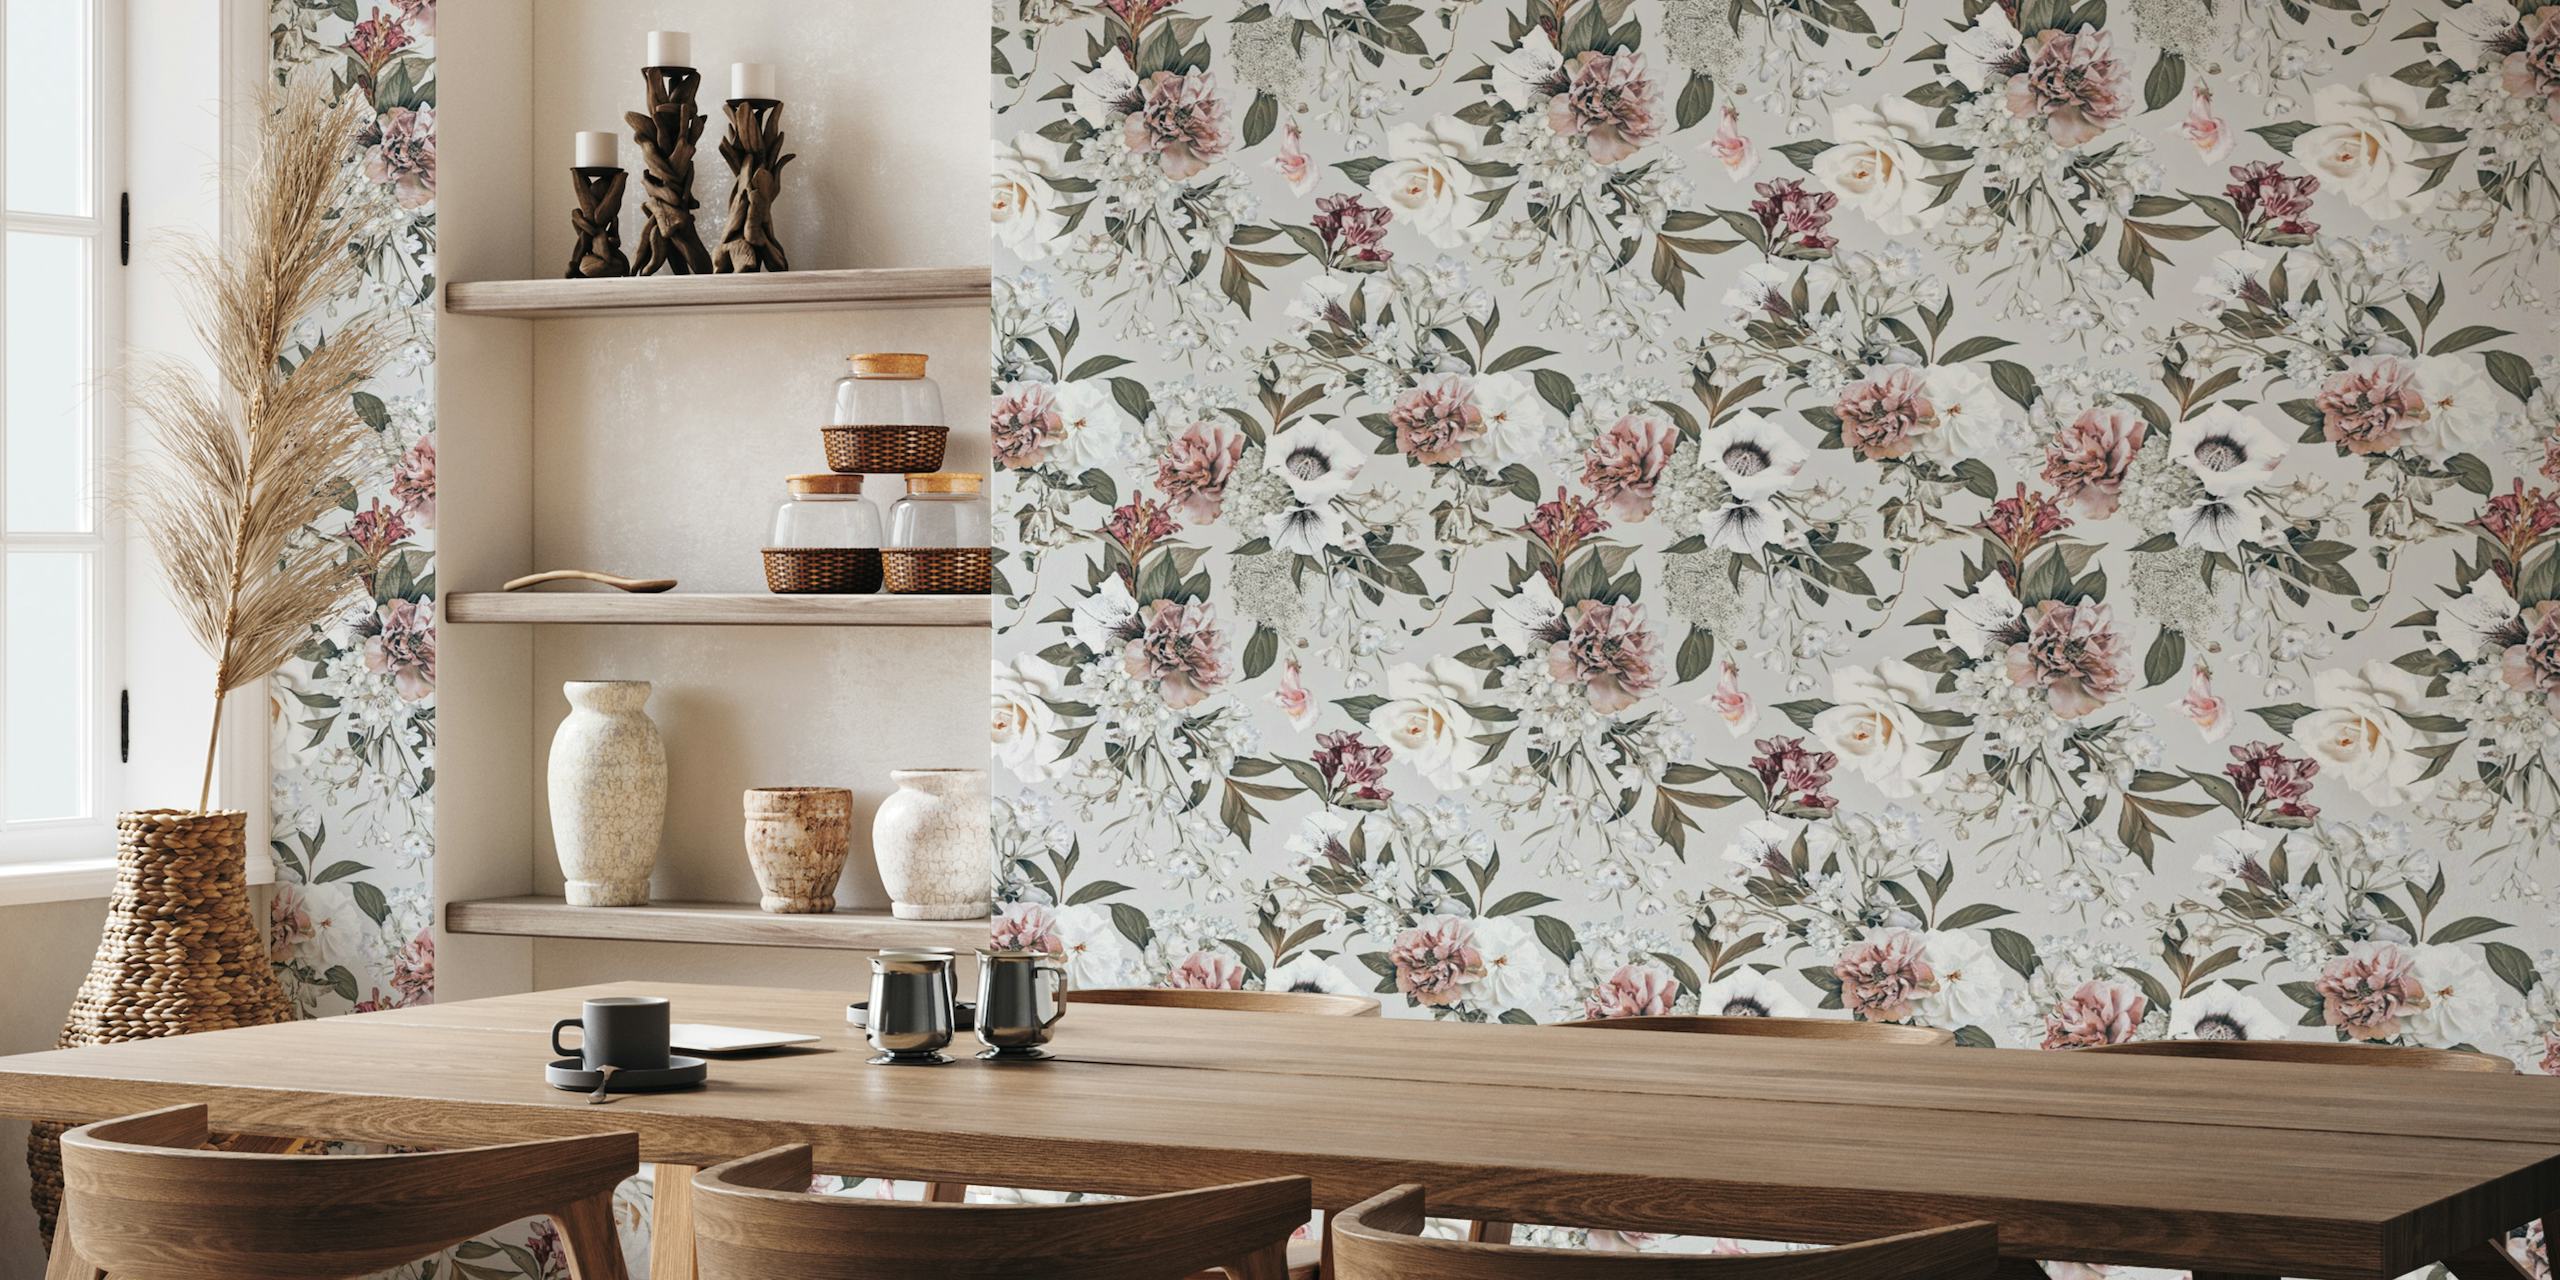 Vintage-inspired floral wall mural with roses and peonies in soft hues